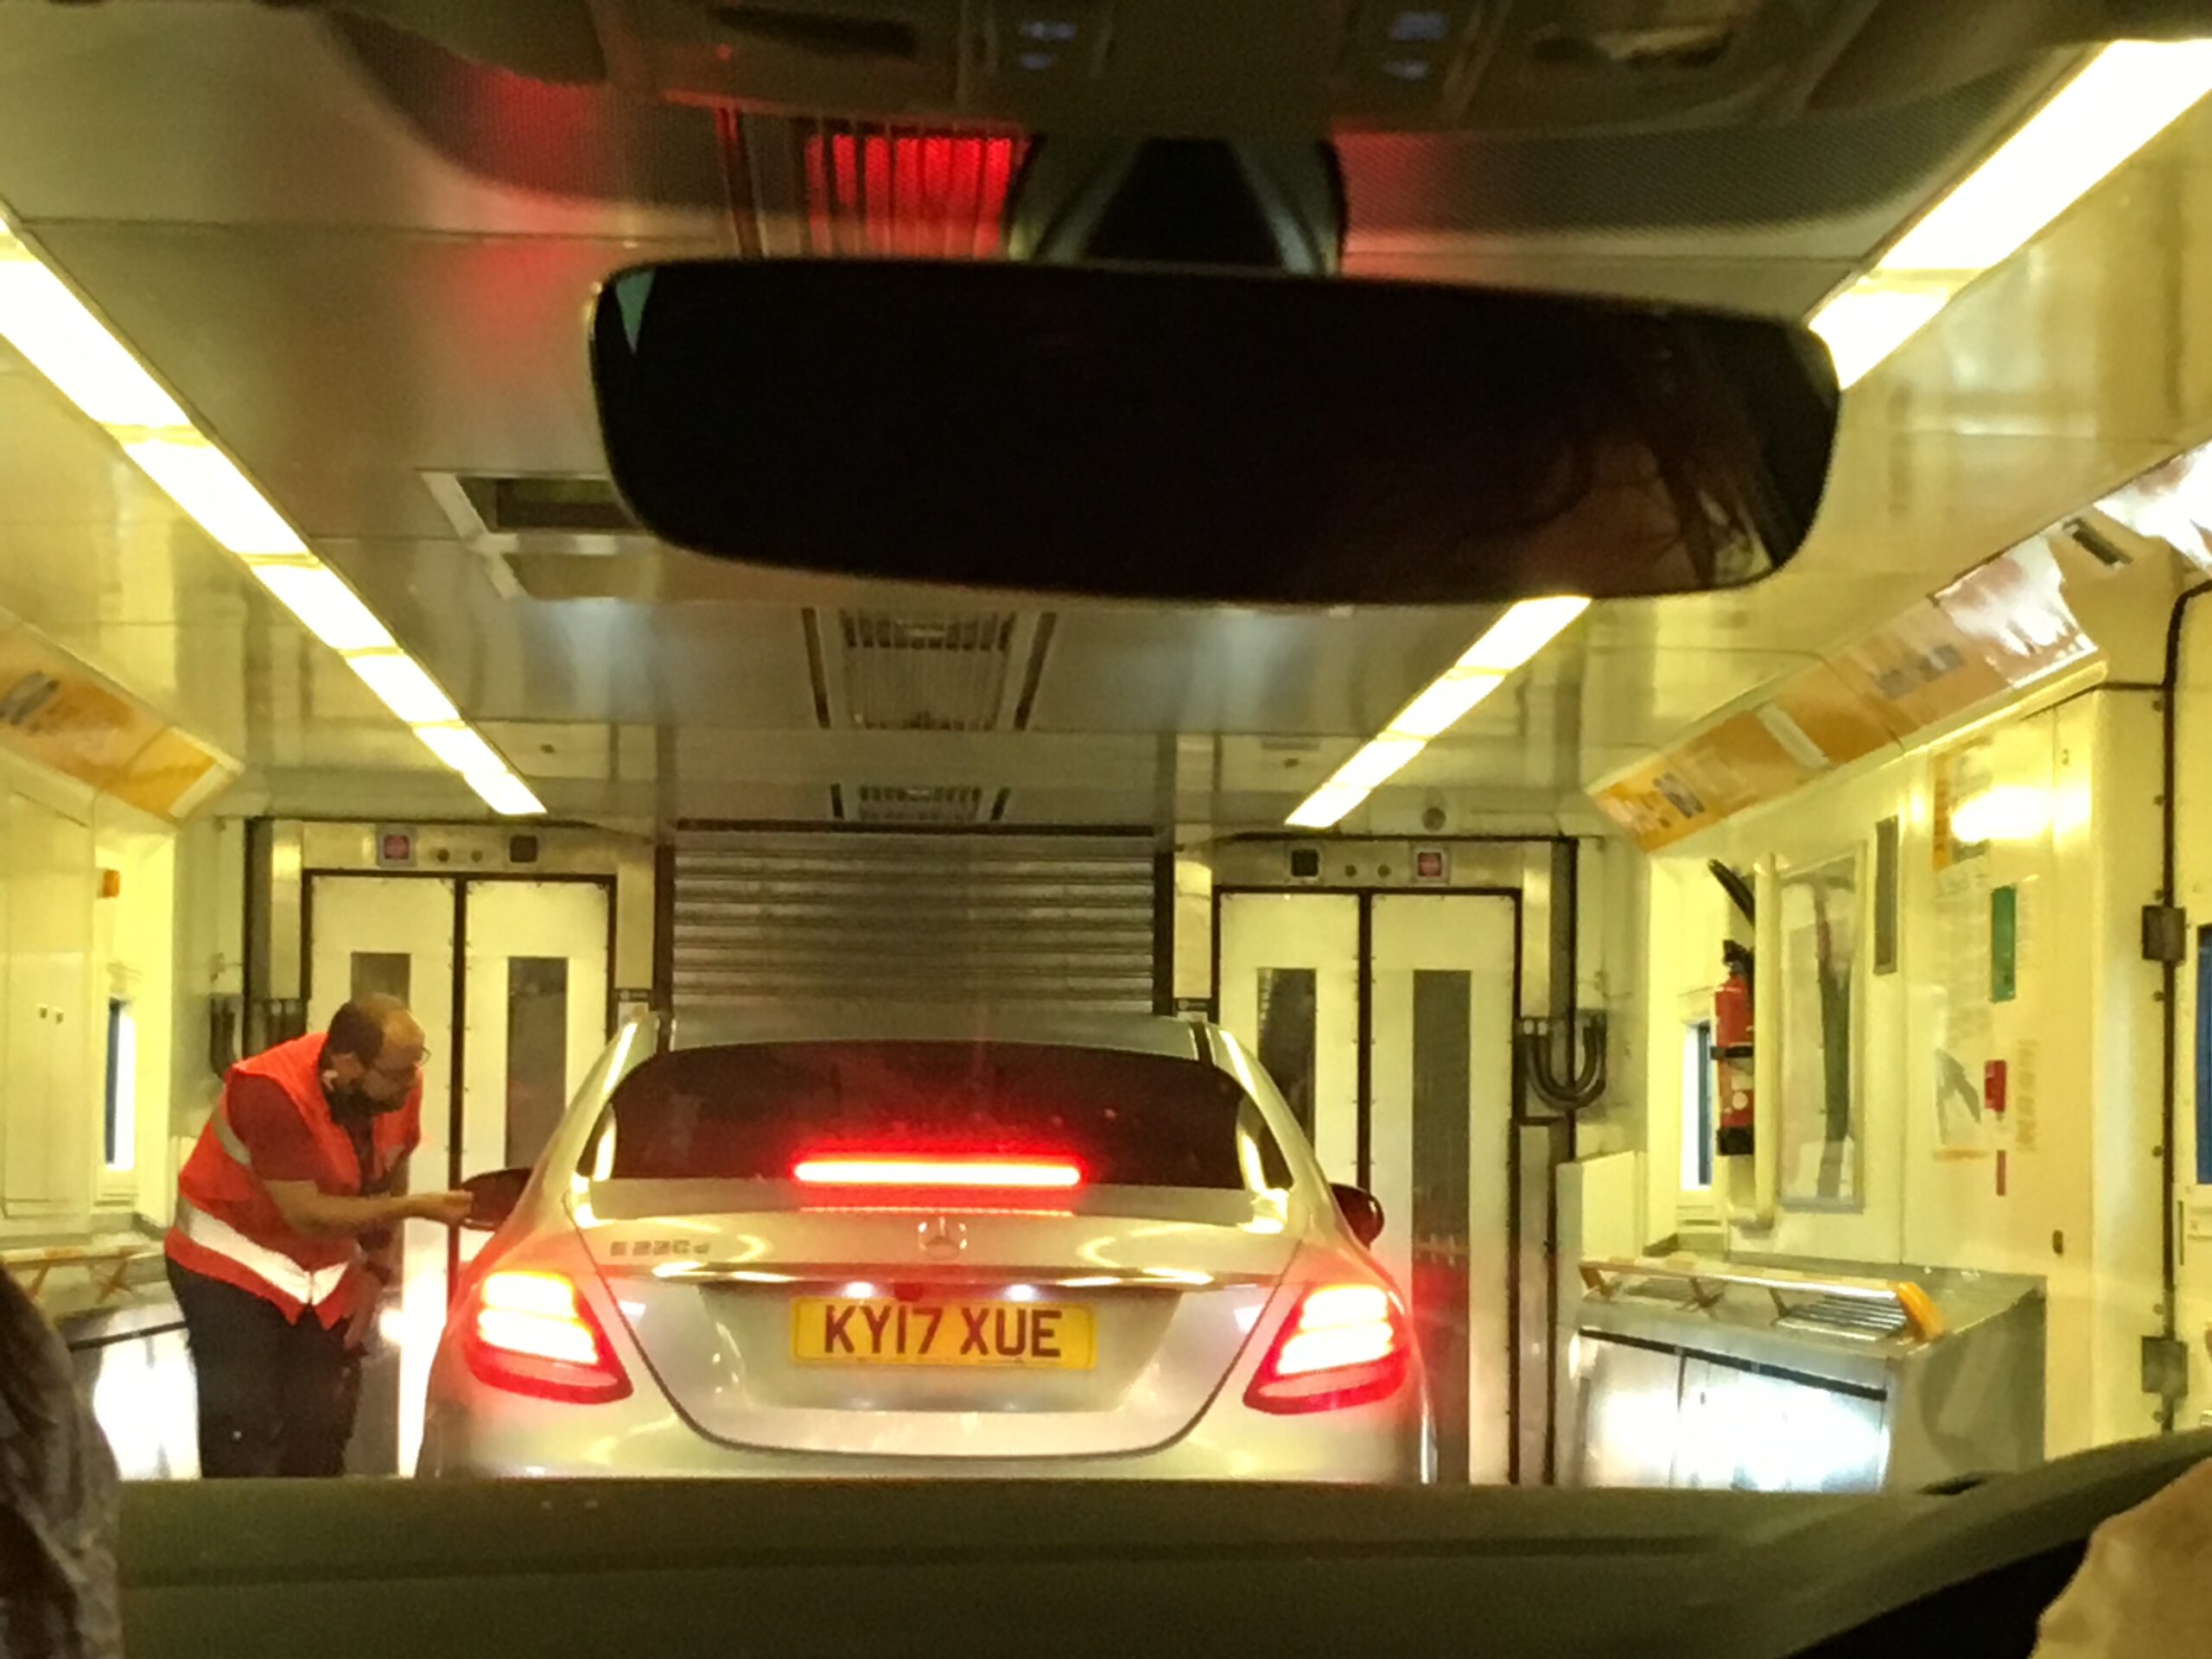 Travelling on the Eurotunnel